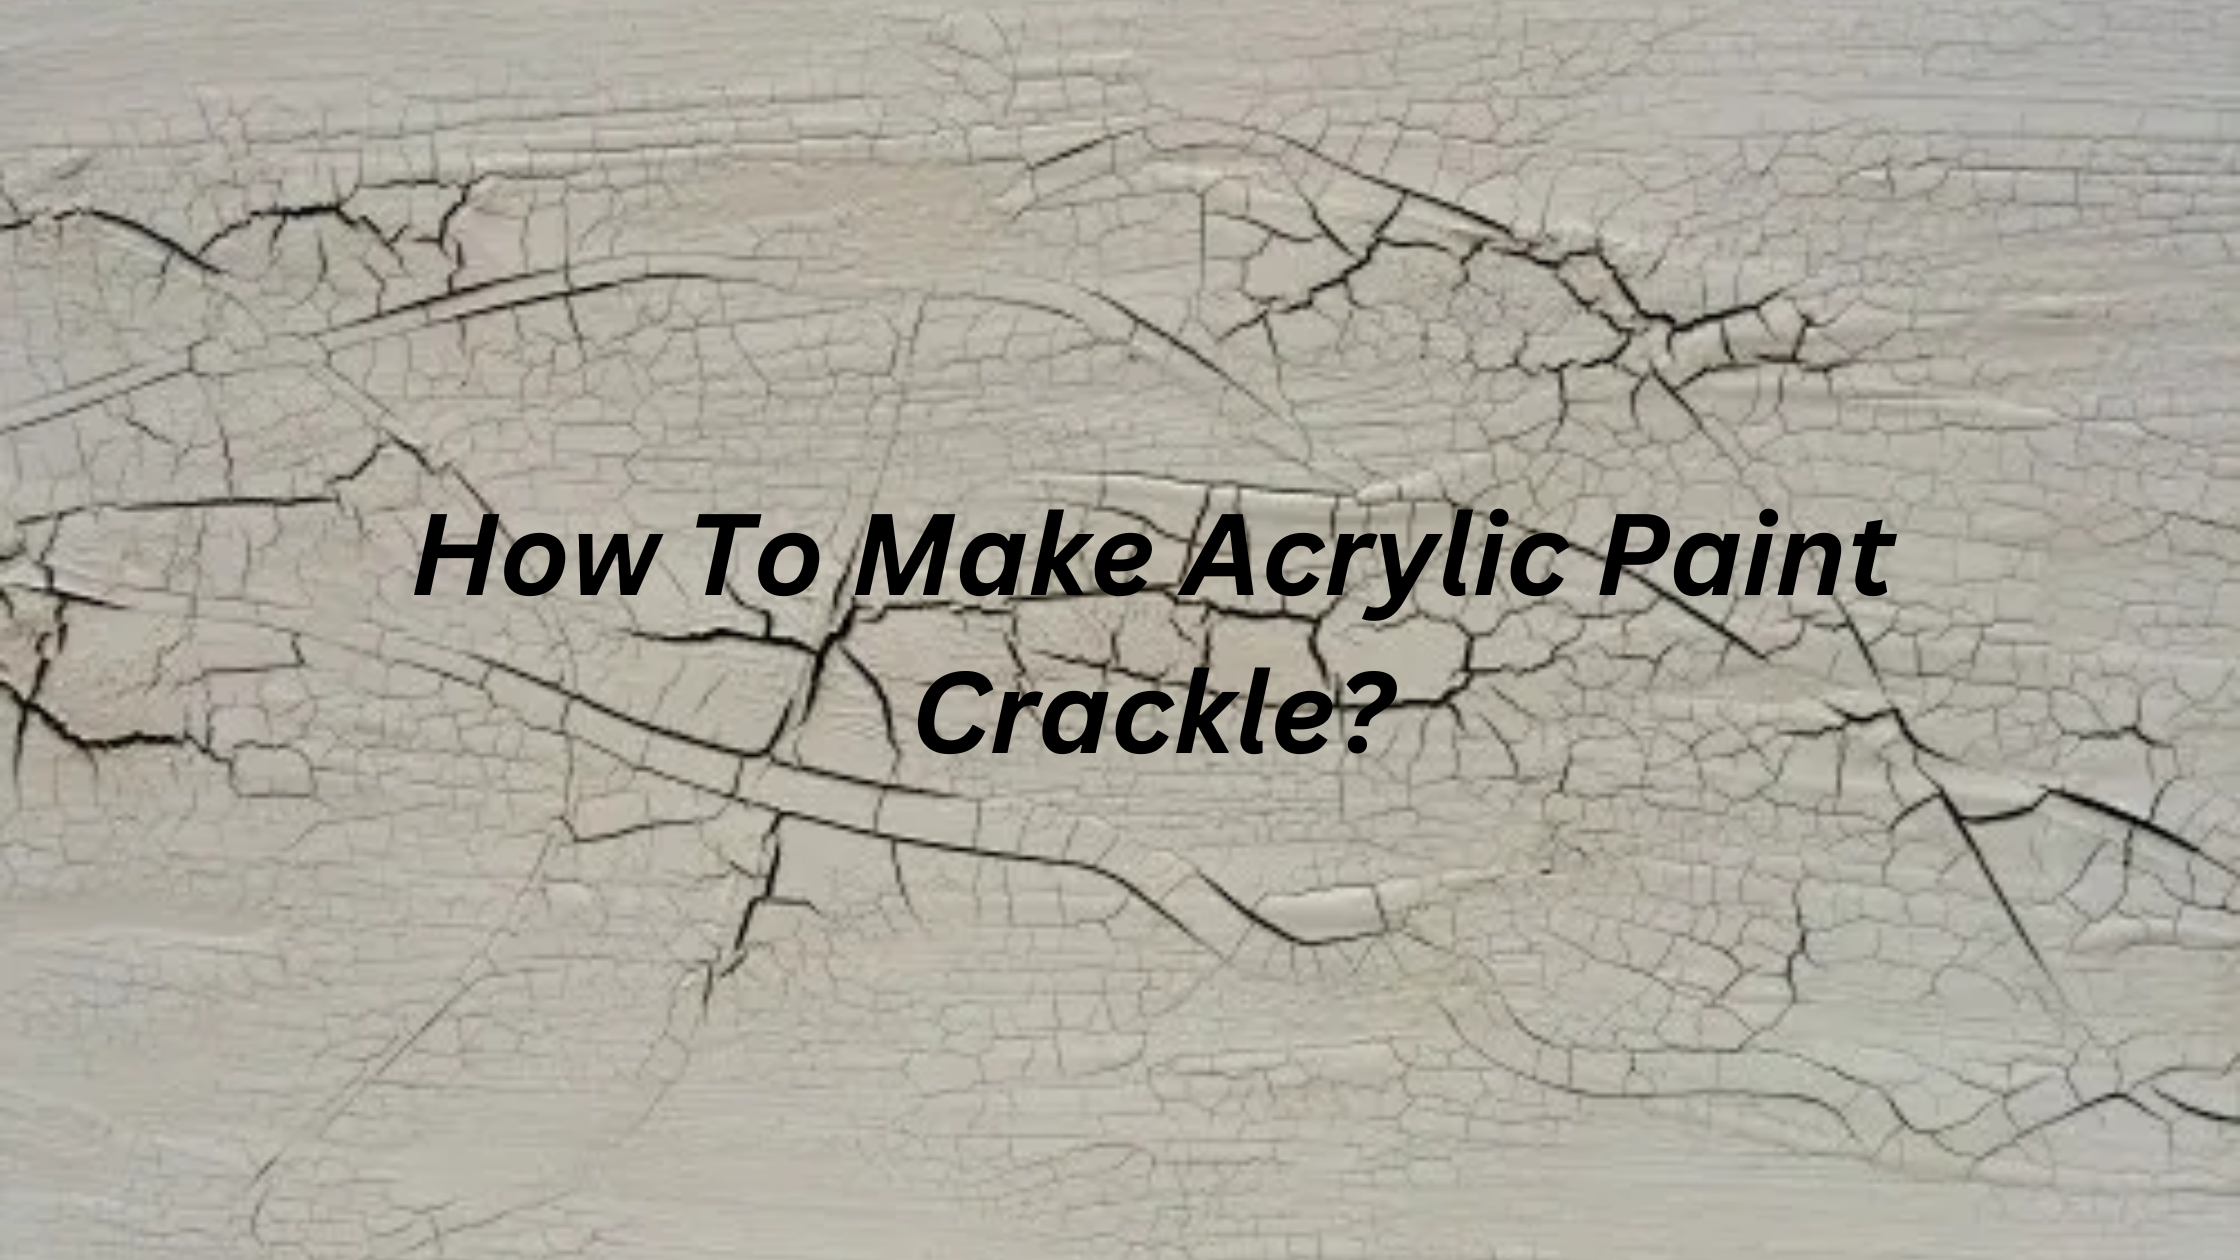 How To Make Acrylic Paint Crackle?